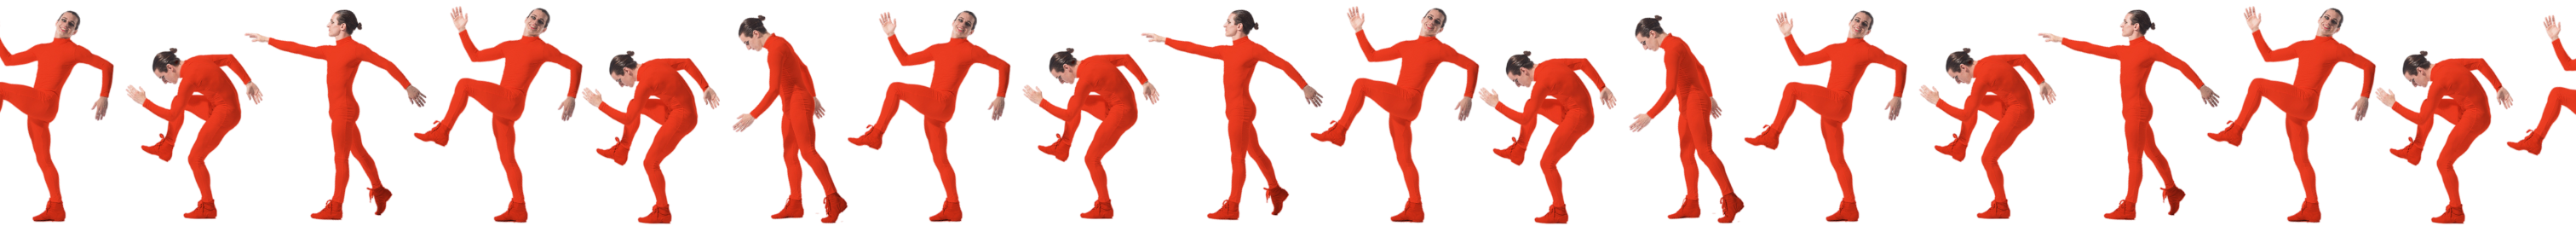 a character in various stages of movement like a flip book